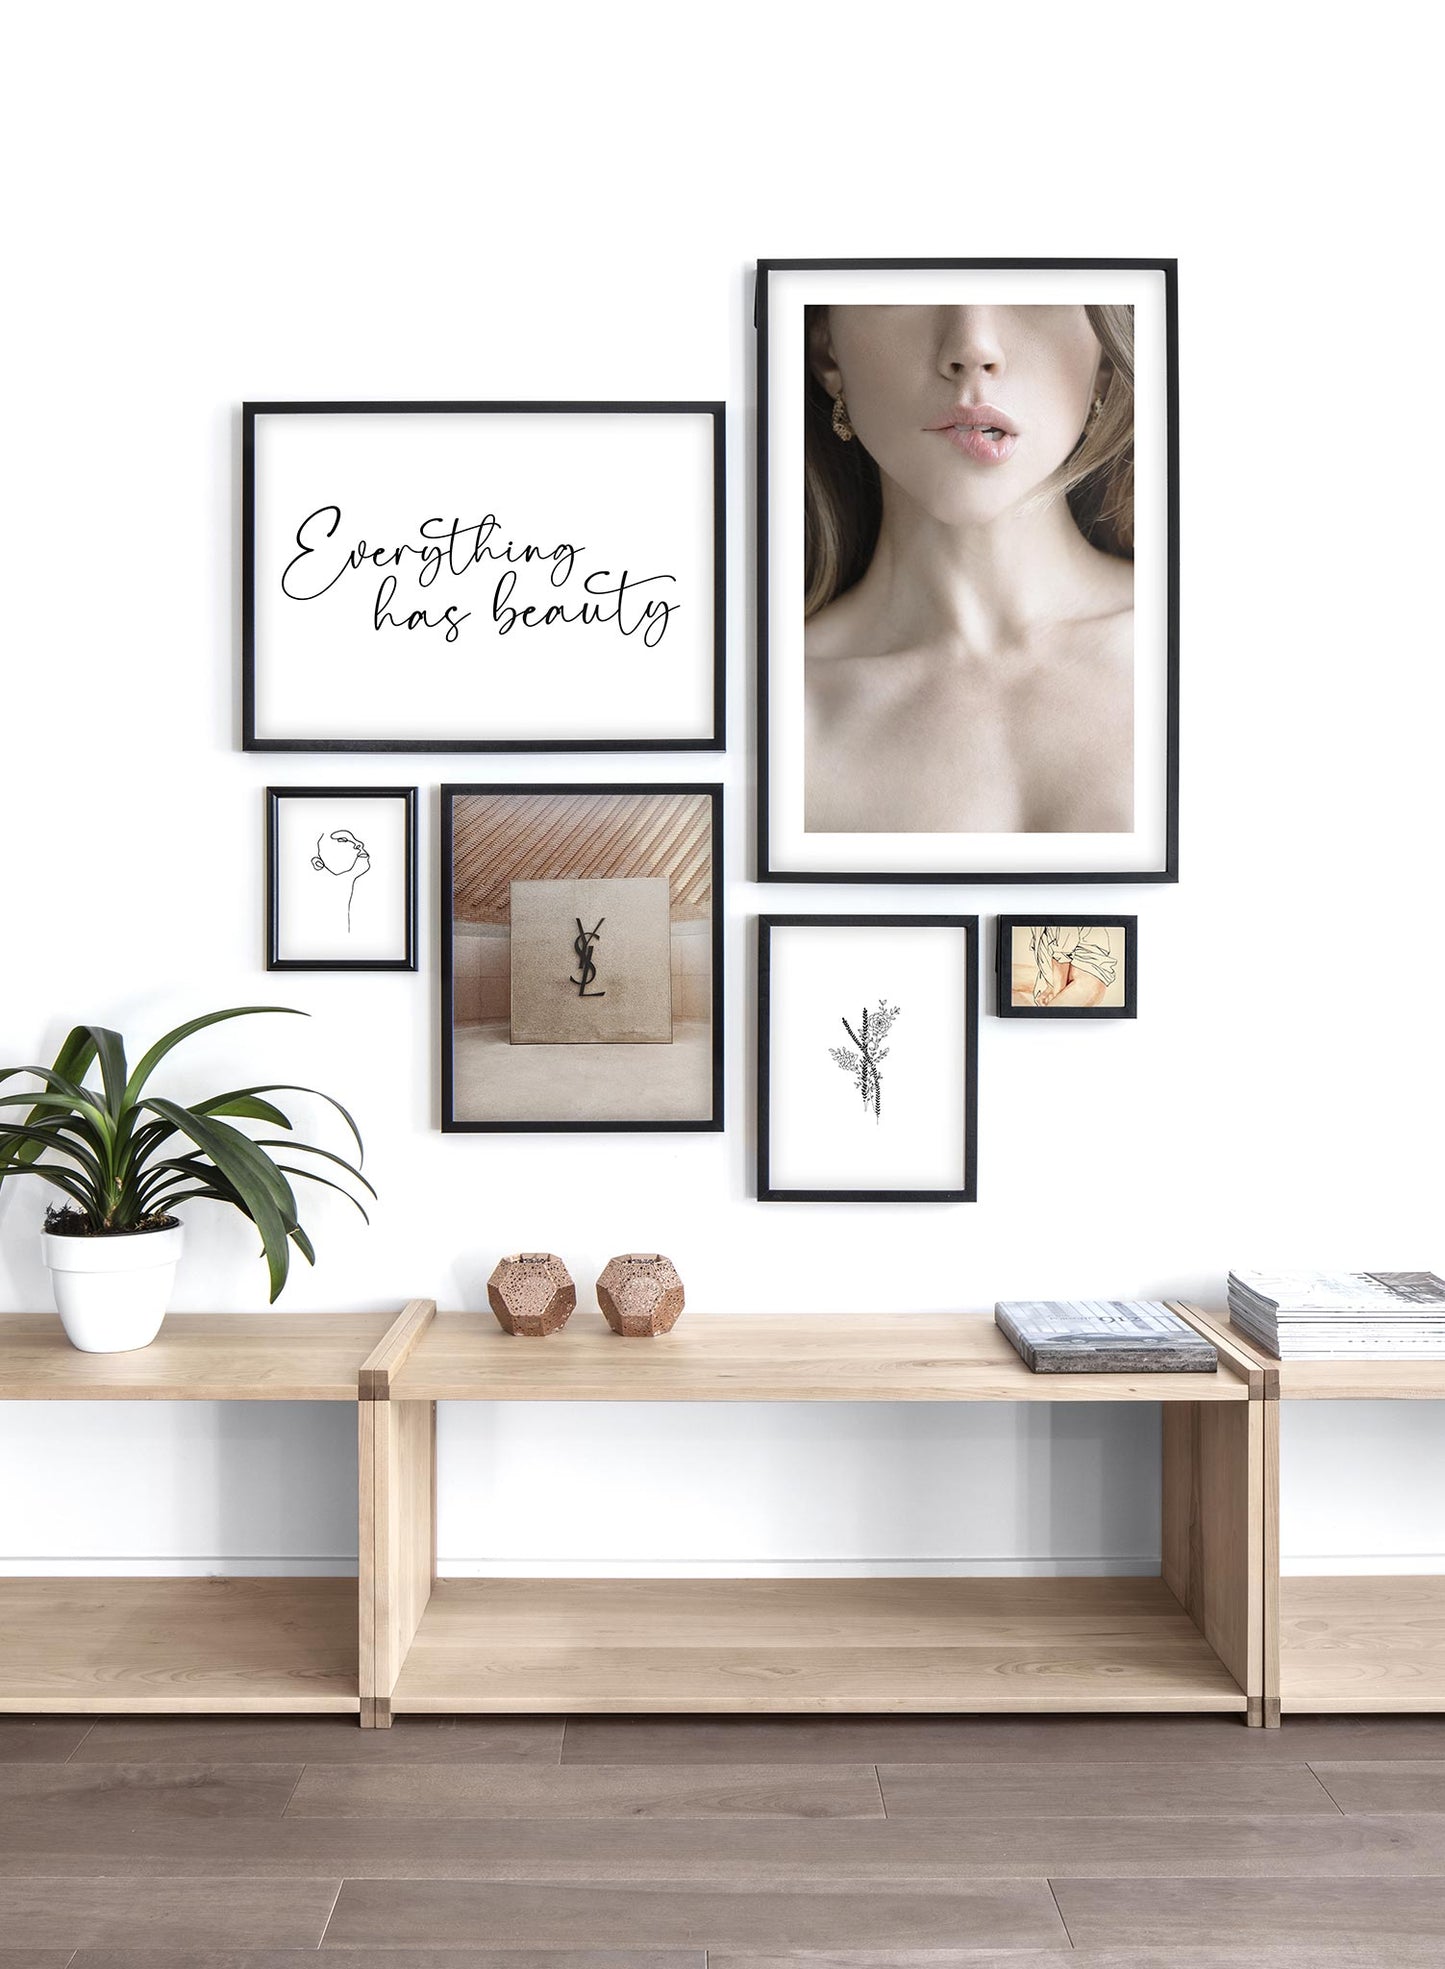 Fashion photography poster by Opposite Wall with woman biting lip - Lifestyle Gallery - Living Room